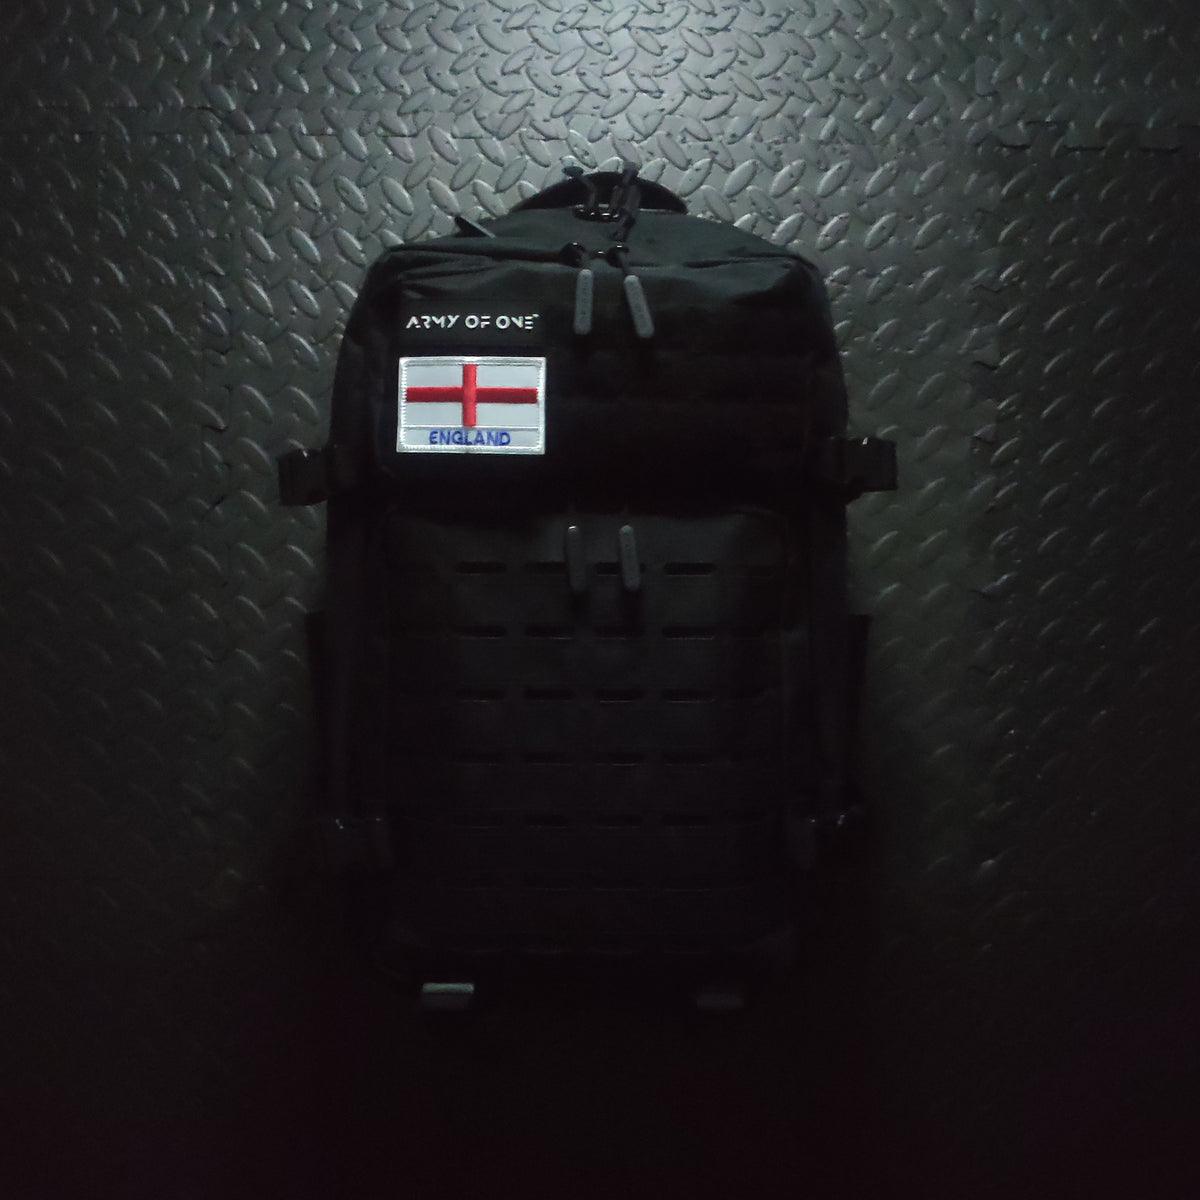 BLACK 45 LITRE ARMY OF ONE BACKPACK WITH VELCRO ENGLISH PATCH ATTACHED